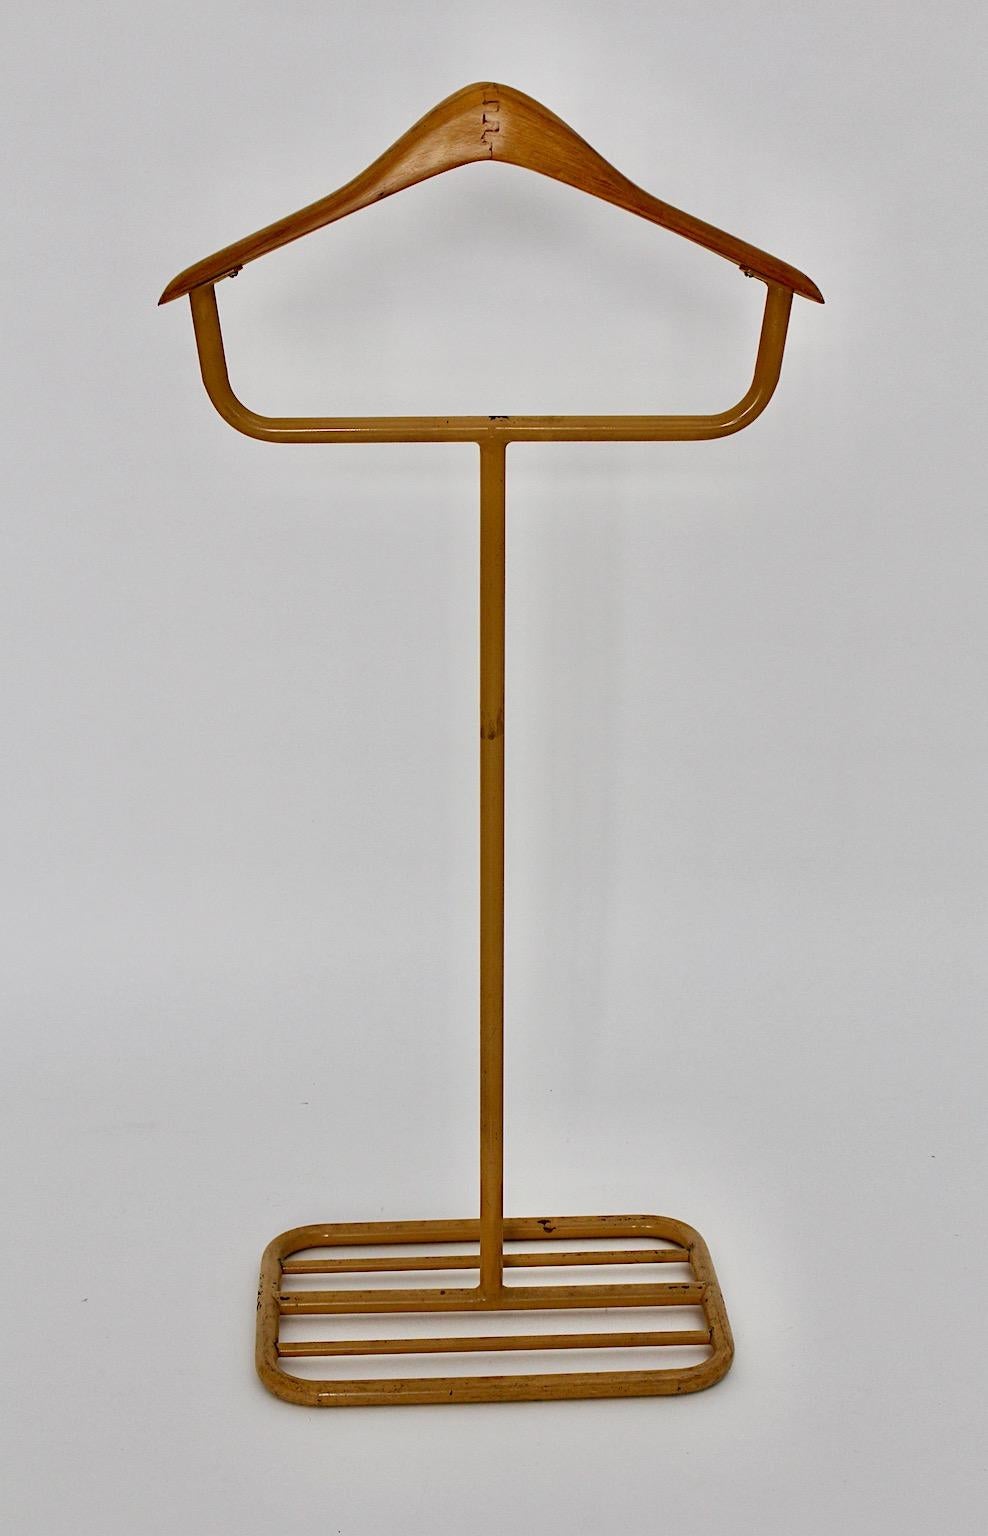 Bauhaus era German Art Deco vintage coat rack or valet from tube steel and beech in dark yellow color, 1930s Germany.
A wonderful Bauhaus style valet or coat rack made from lacquered tube steel and a solid beech hanger. Through the sleek and plain